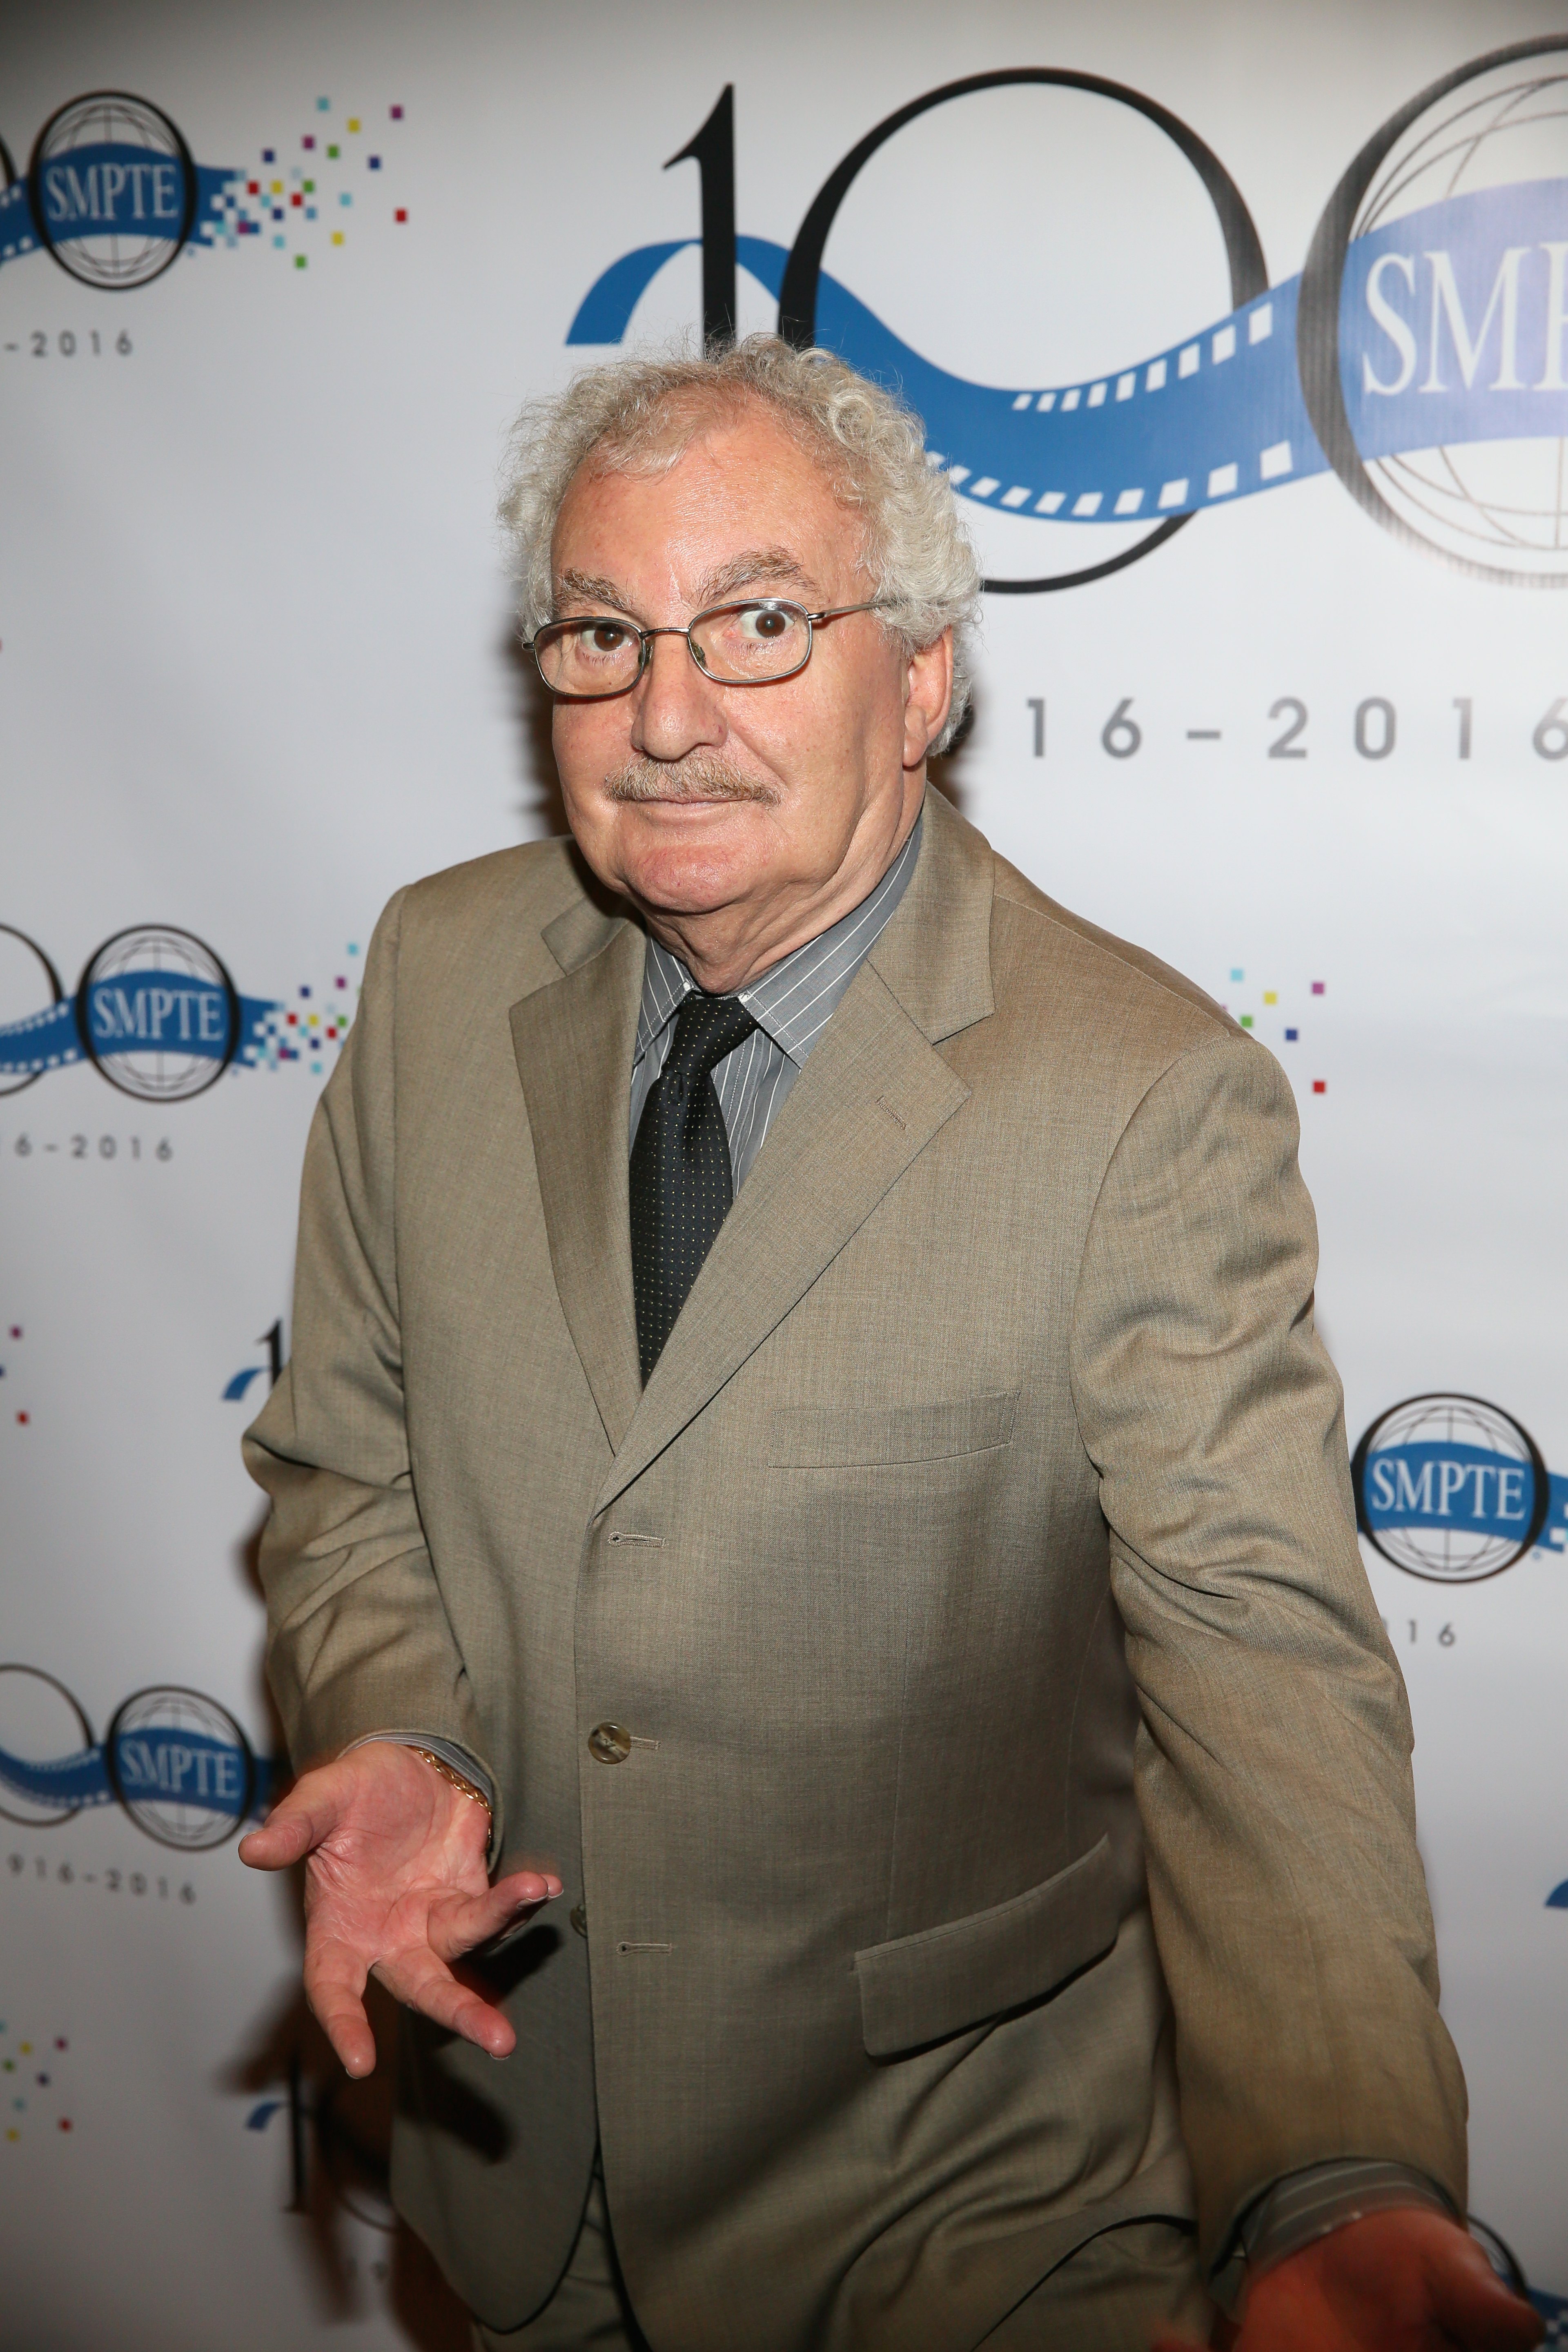 Ioan Allen Walks the Red Carpet at the SMPTE 2014 Honors & Awards Ceremony